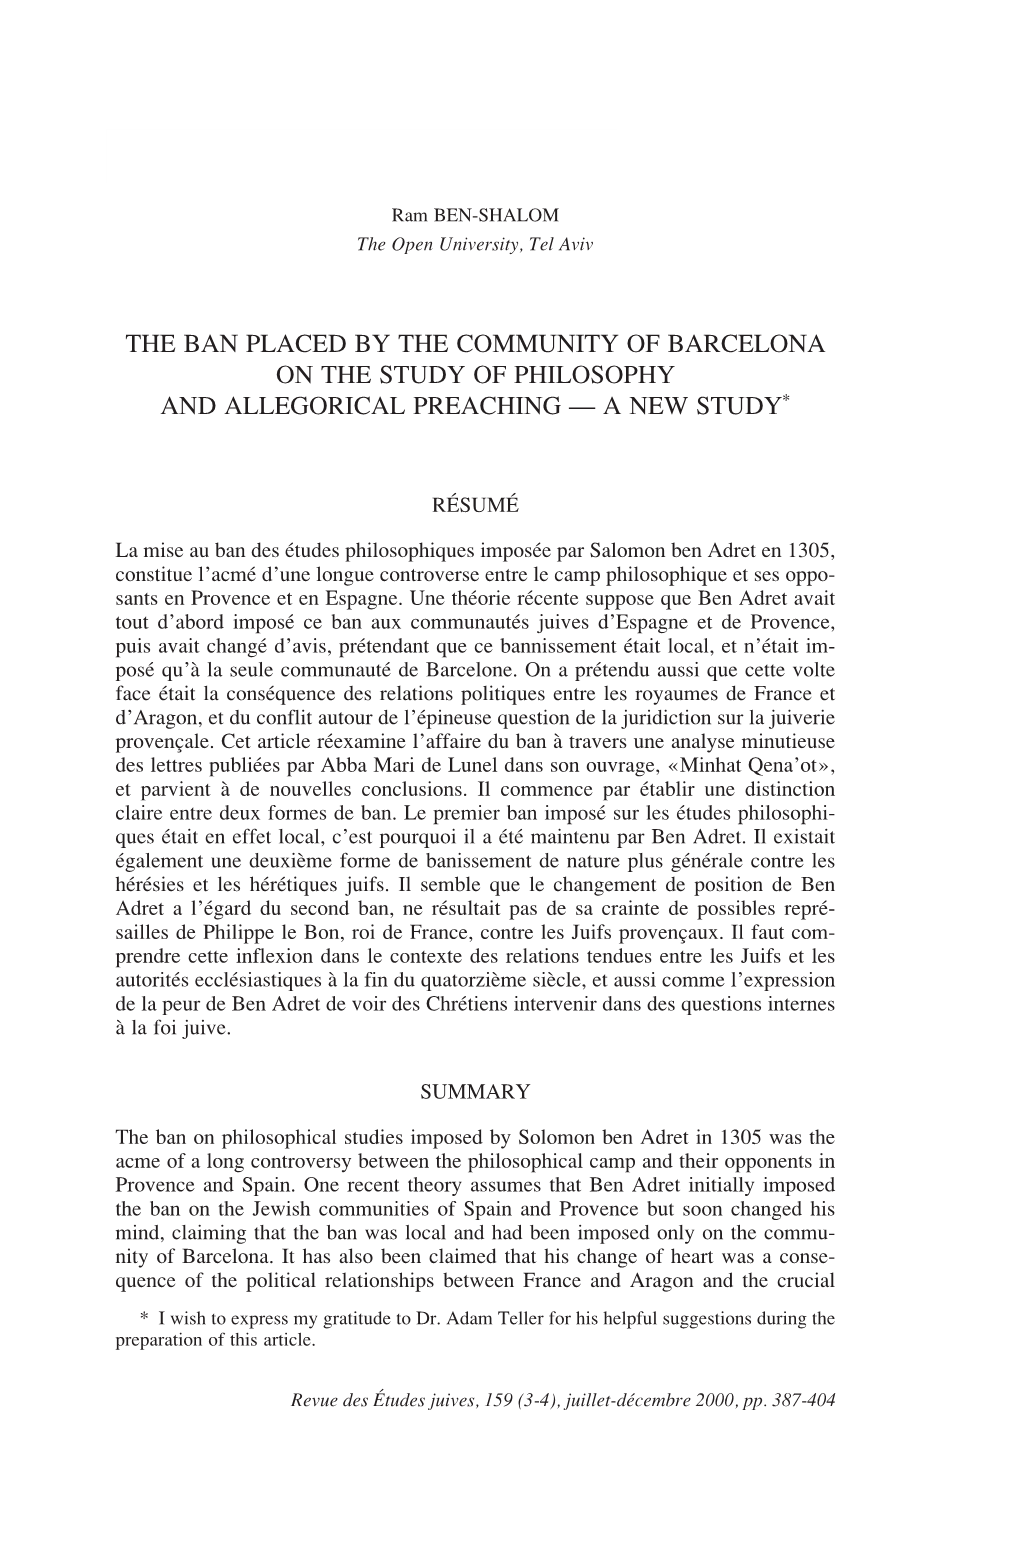 The Ban Placed by the Community of Barcelona on the Study of Philosophy and Allegorical Preaching — a New Study*